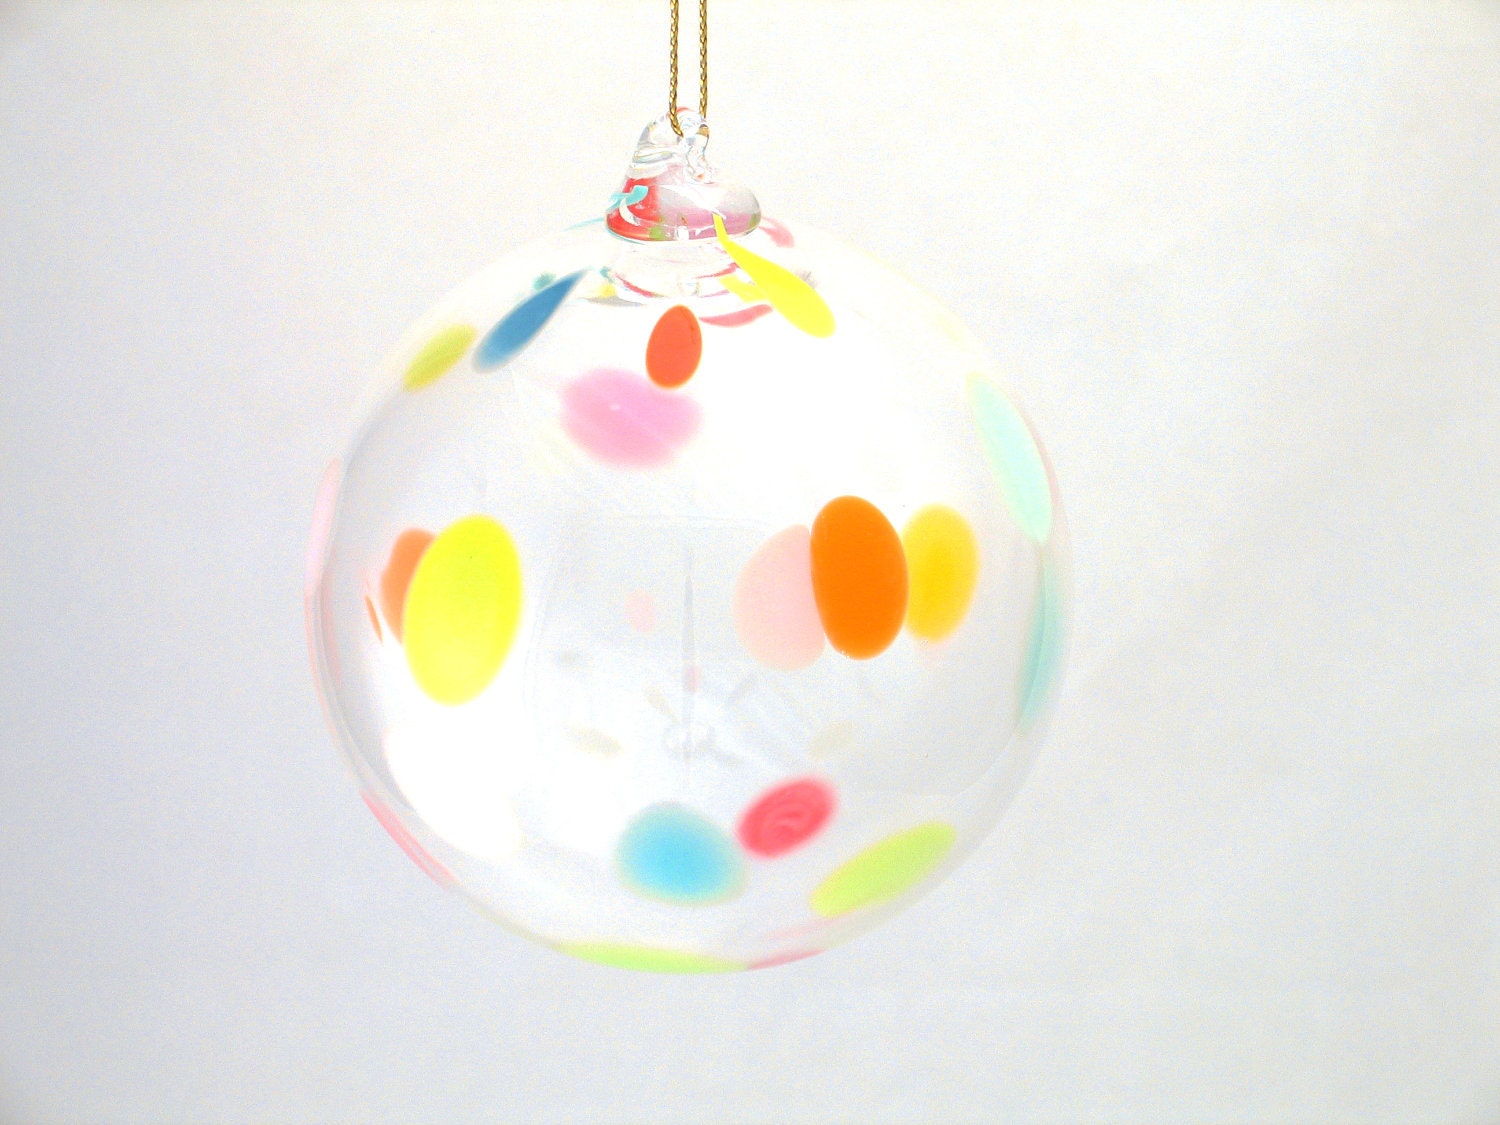 Glass Christmas Ornament Suncatcher - Colorful Polka Dots - Glass Ball - orange yellow pink blue - dreamt ateam oht - Under 25